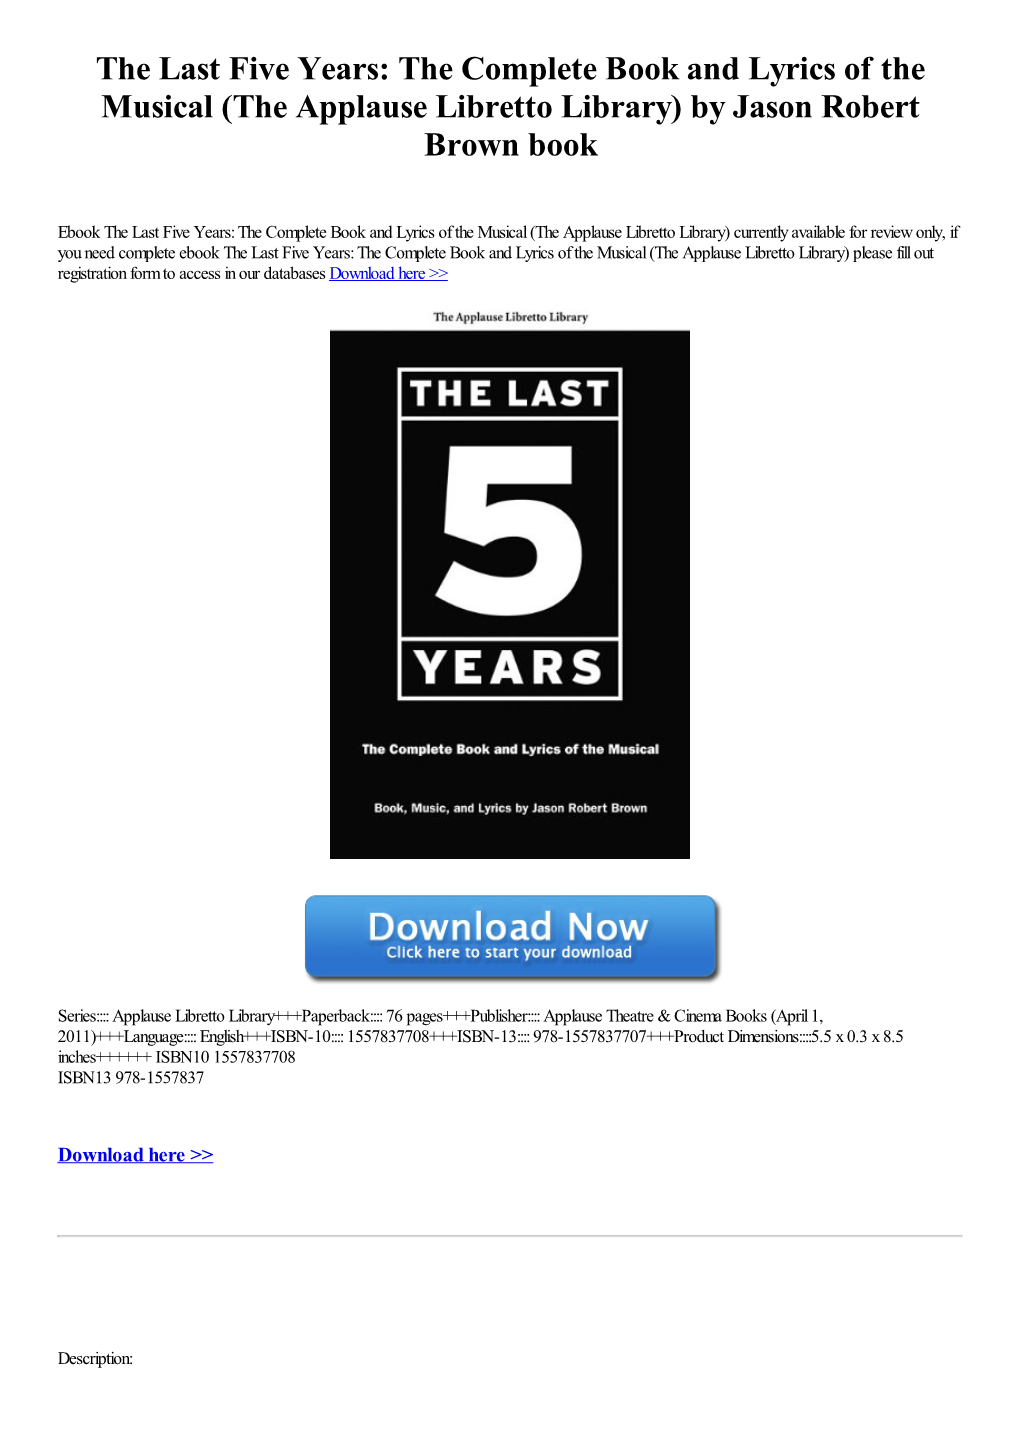 The Last Five Years: the Complete Book and Lyrics of the Musical (The Applause Libretto Library) by Jason Robert Brown Book